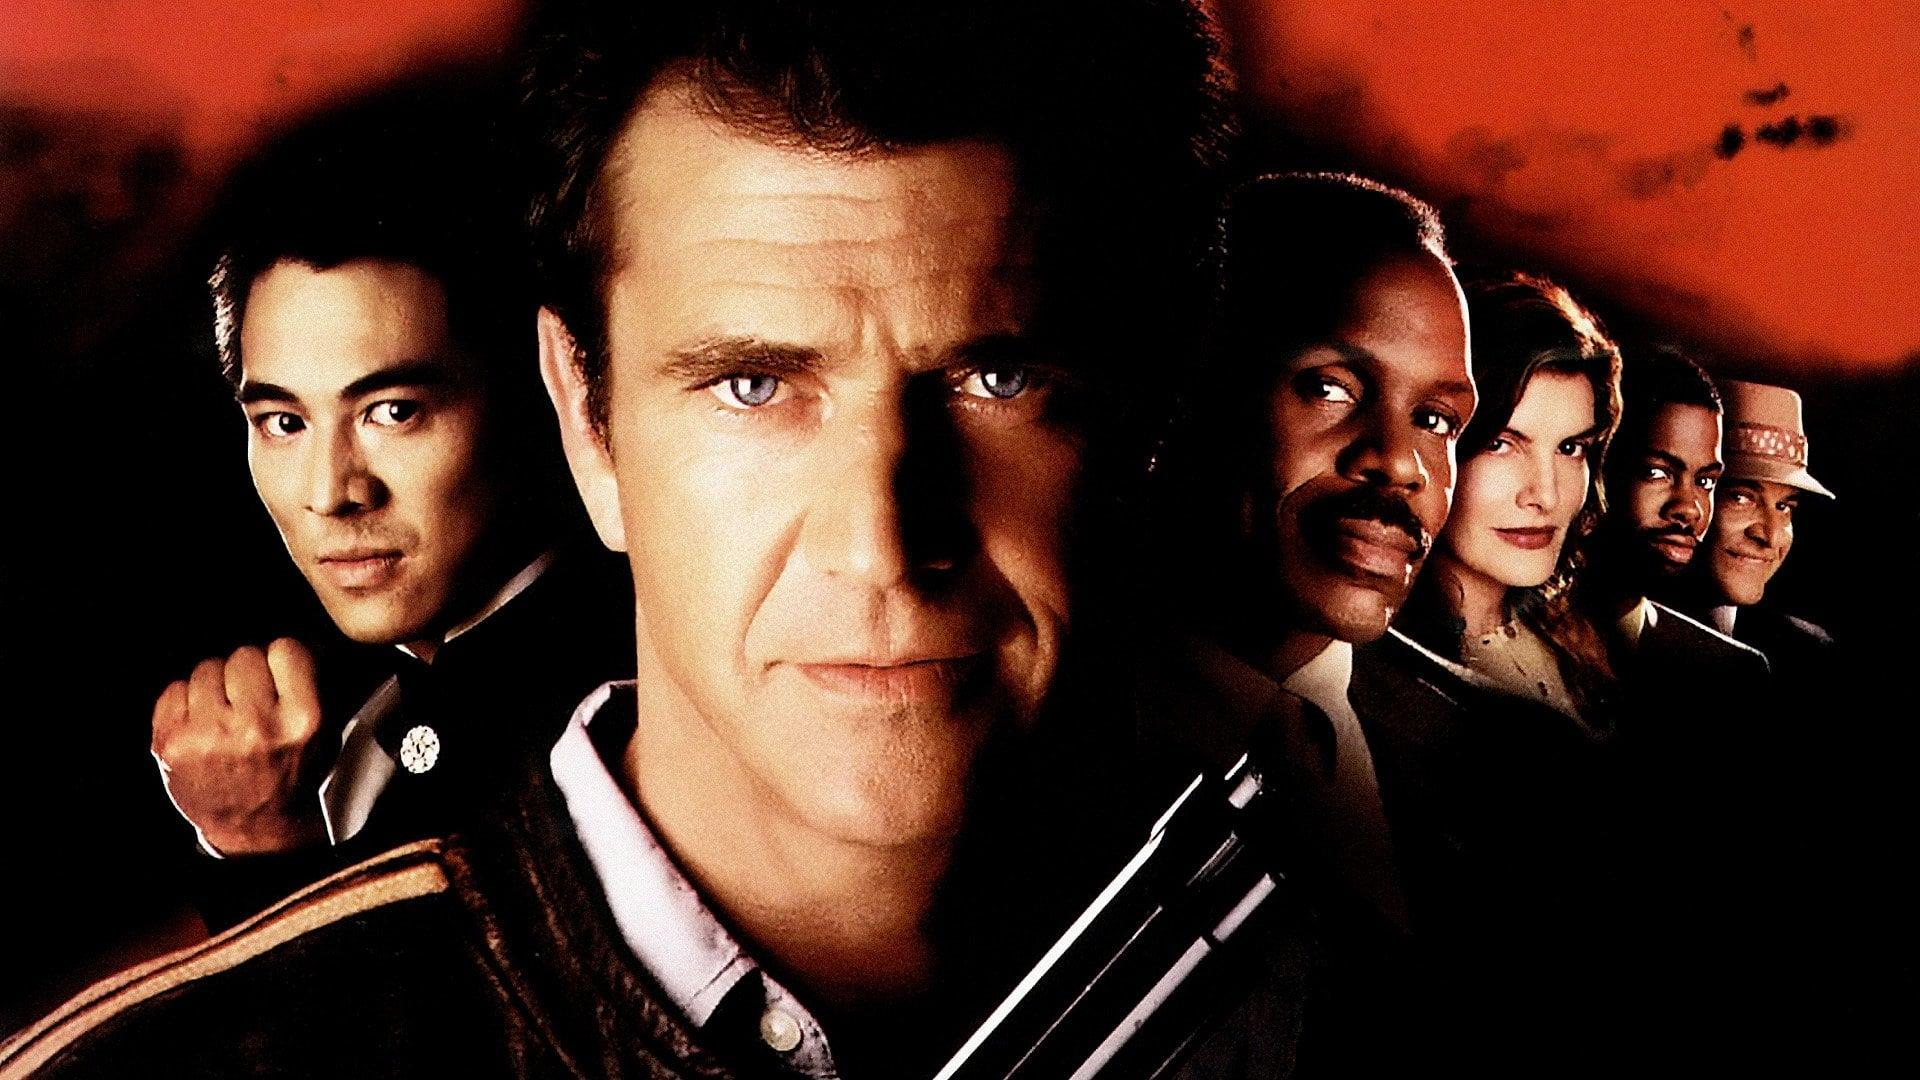 Lethal Weapon 4 backdrop